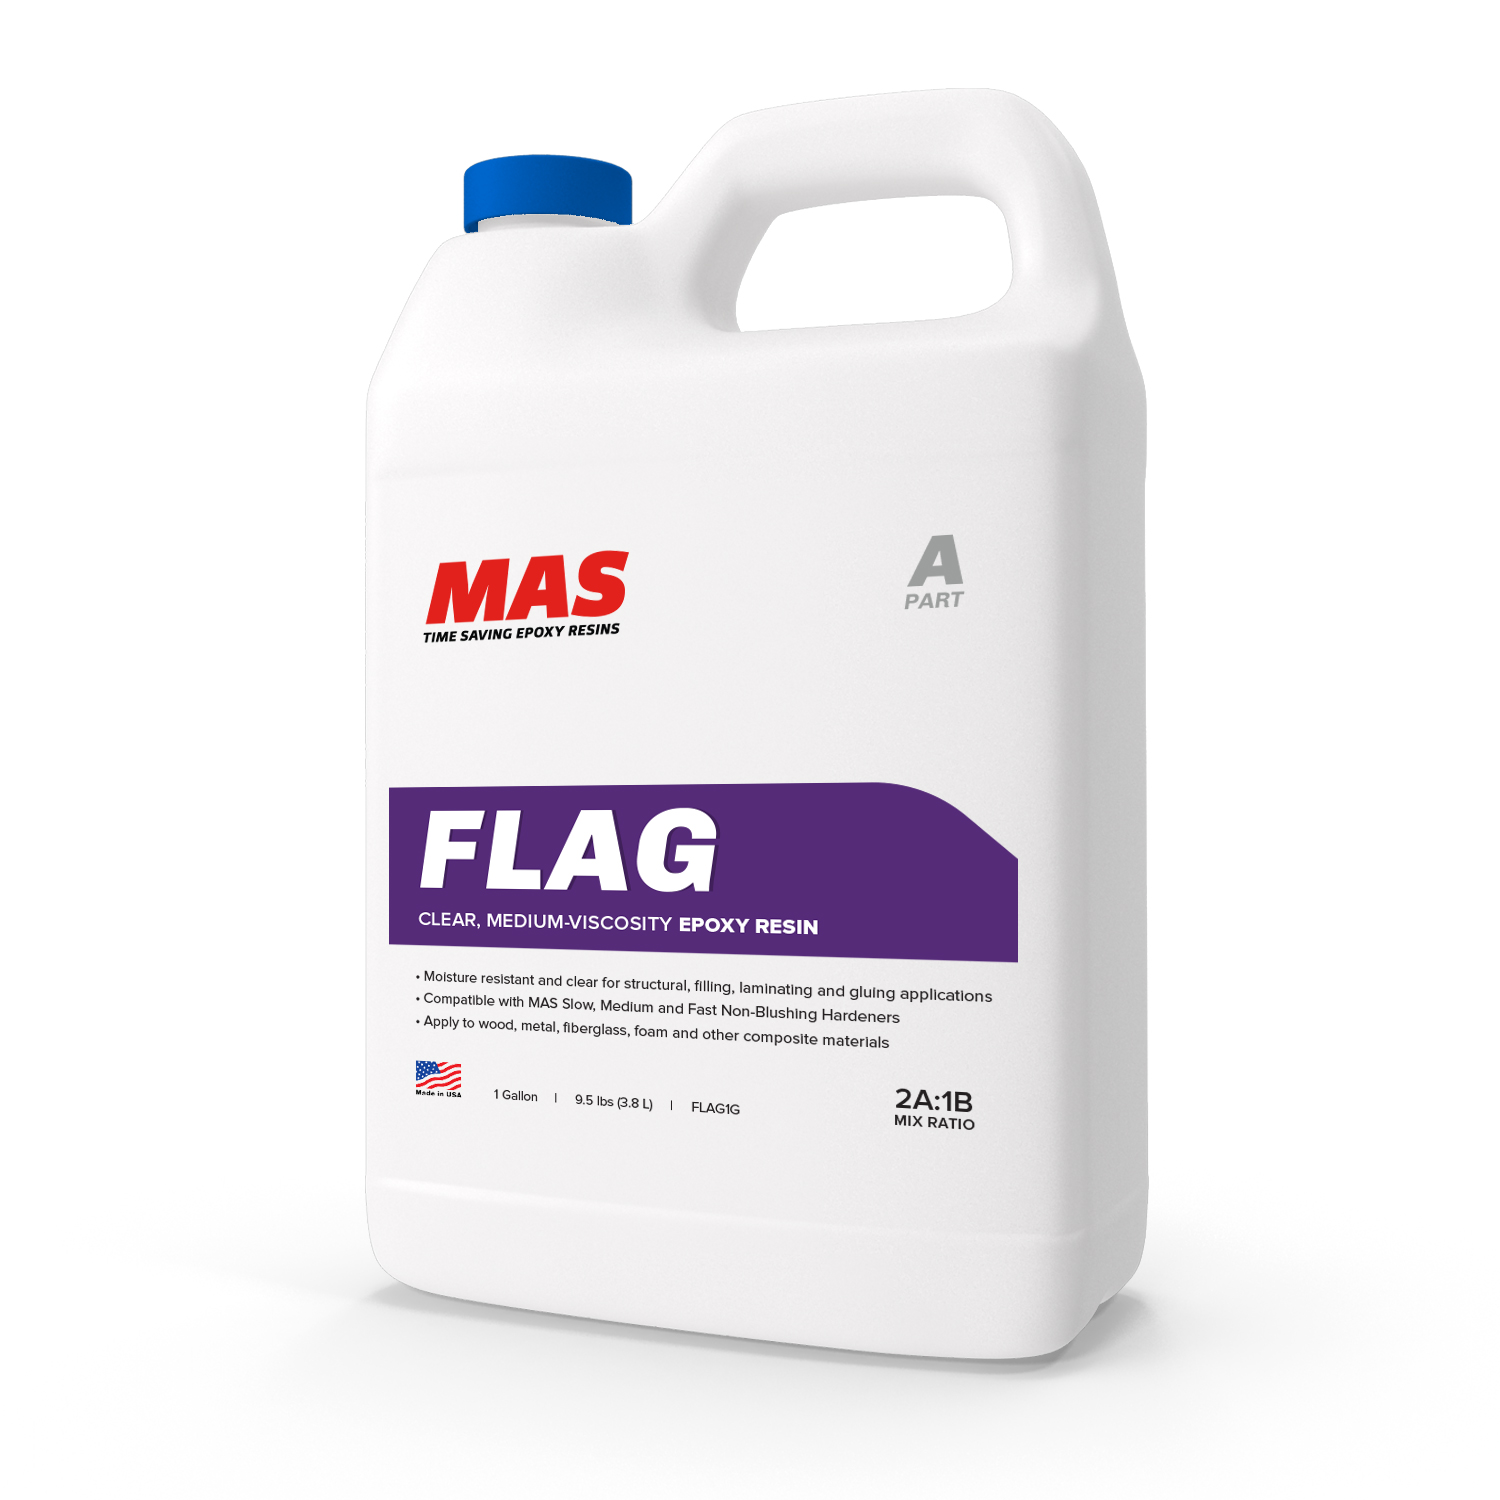 FLAG Epoxy Resin for Structural Filling Laminating Adhesion and Gluing Questions & Answers